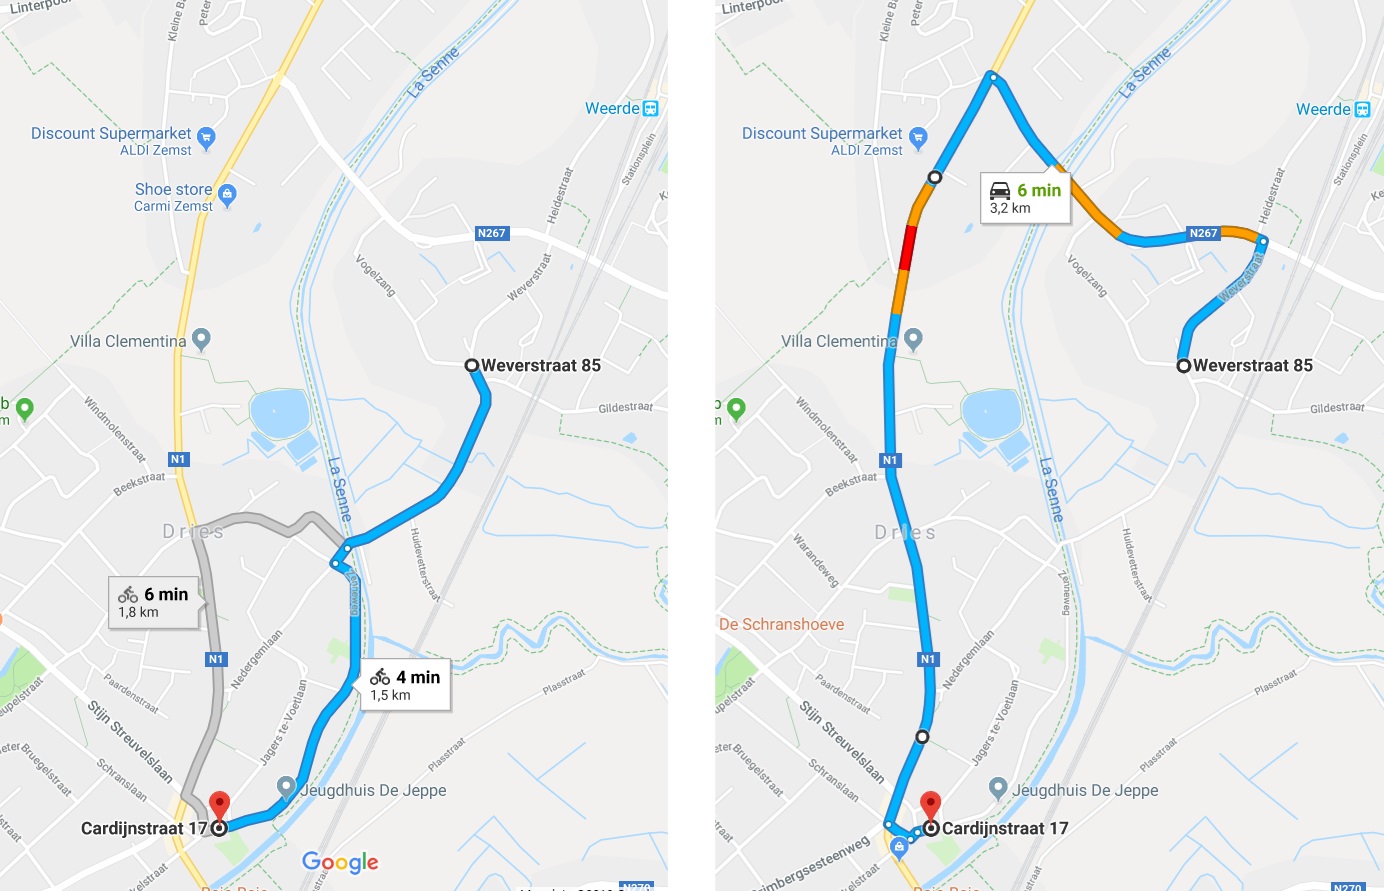 Comparison of route between southern Weerde and centre of Eppegem by bike (1.5 km) and by car (3.2 km). Filtered permeability on local roads is an additional incentive to walk or cycle short distances.